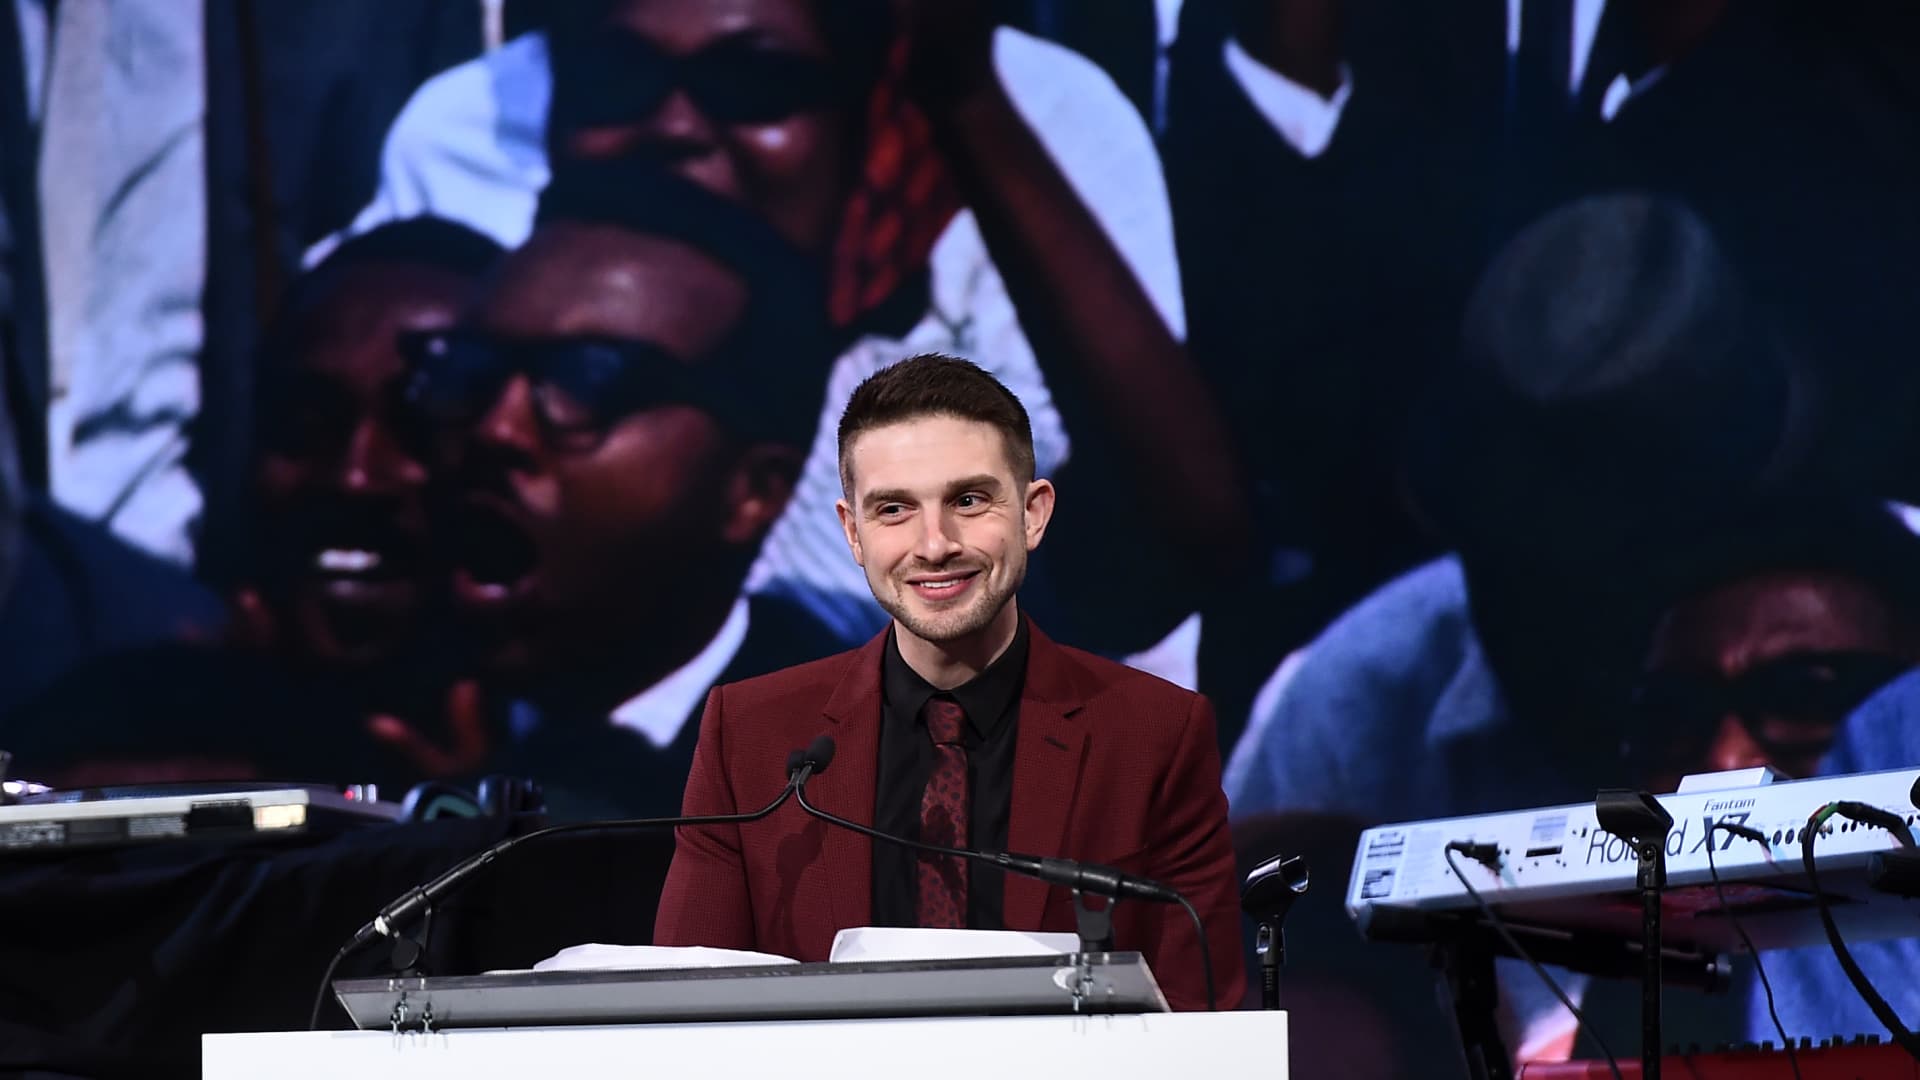 NEW YORK, NY - JUNE 06:Alexander Soros speaks during 2017 Gordon Parks Foundation Awards Gala at Cipriani 42nd Street on June 6, 2017 in New York City.(Photo by Ilya S. Savenok/Getty Images)